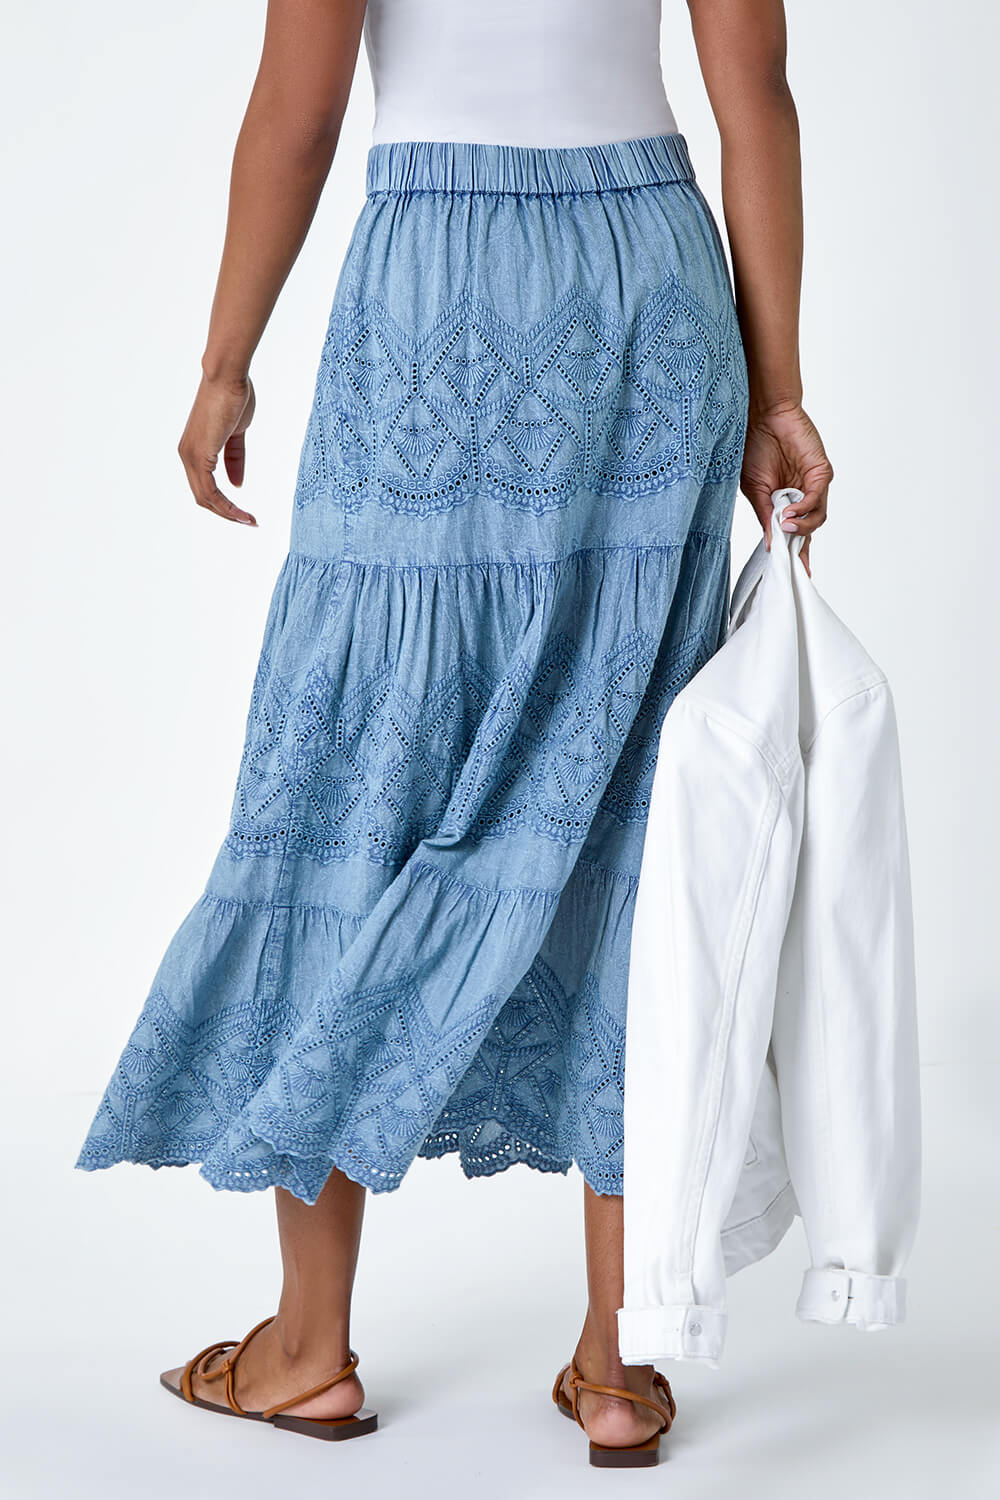  Broderie Tiered Stretch Midi Skirt, Image 2 of 6